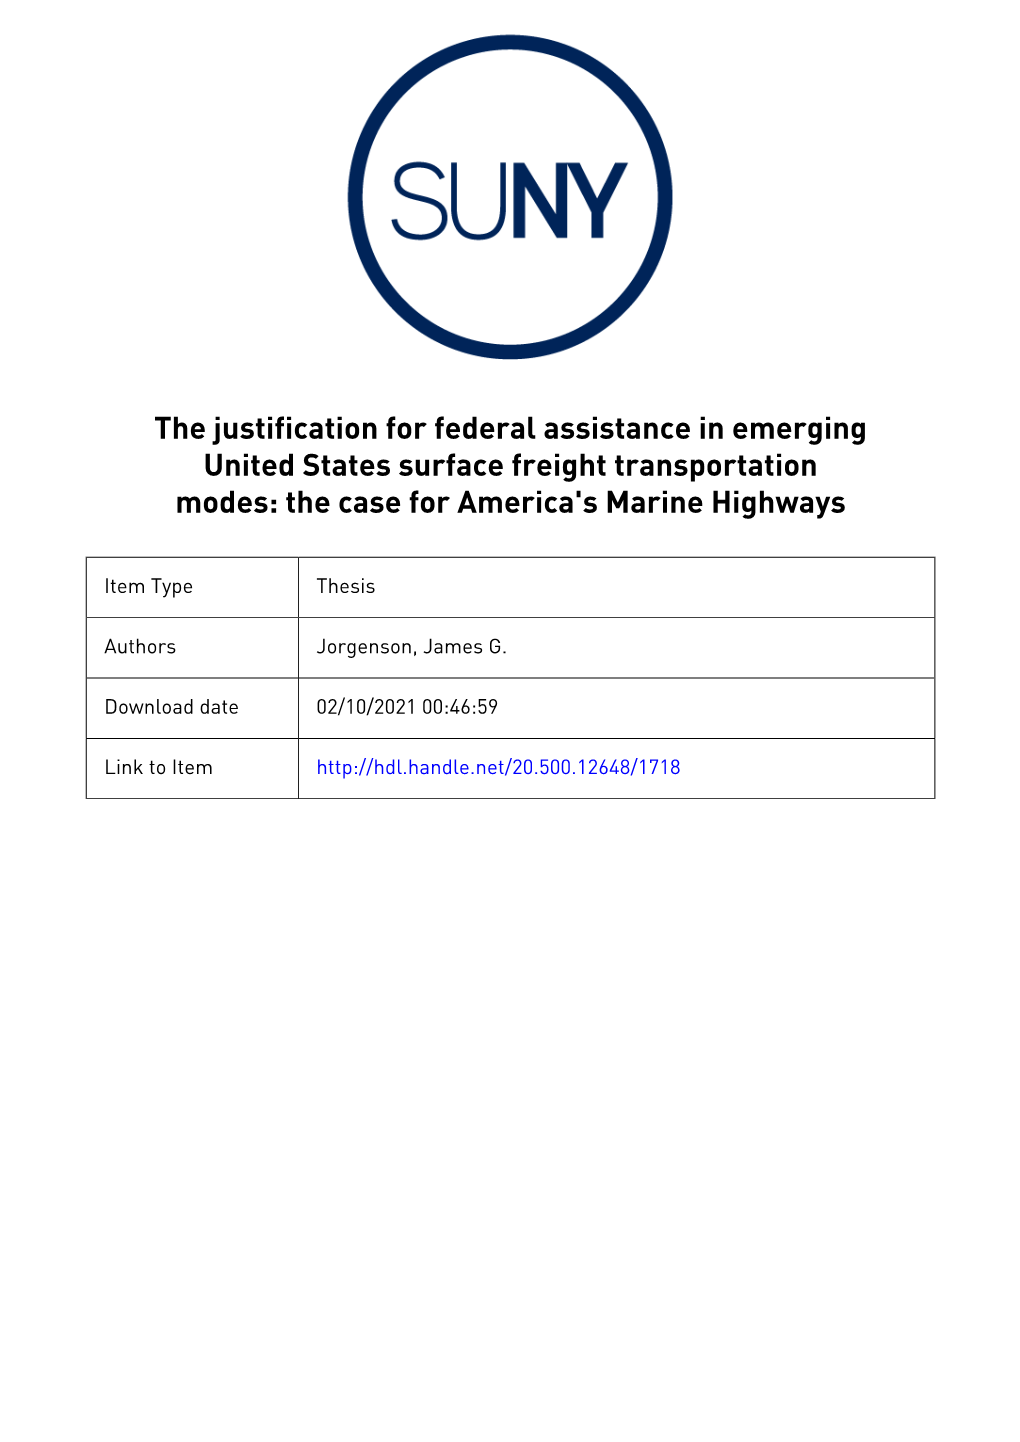 The Justification for Federal Assistance in Emerging United States Surface Freight Transportation Modes: the Case for America's Marine Highways